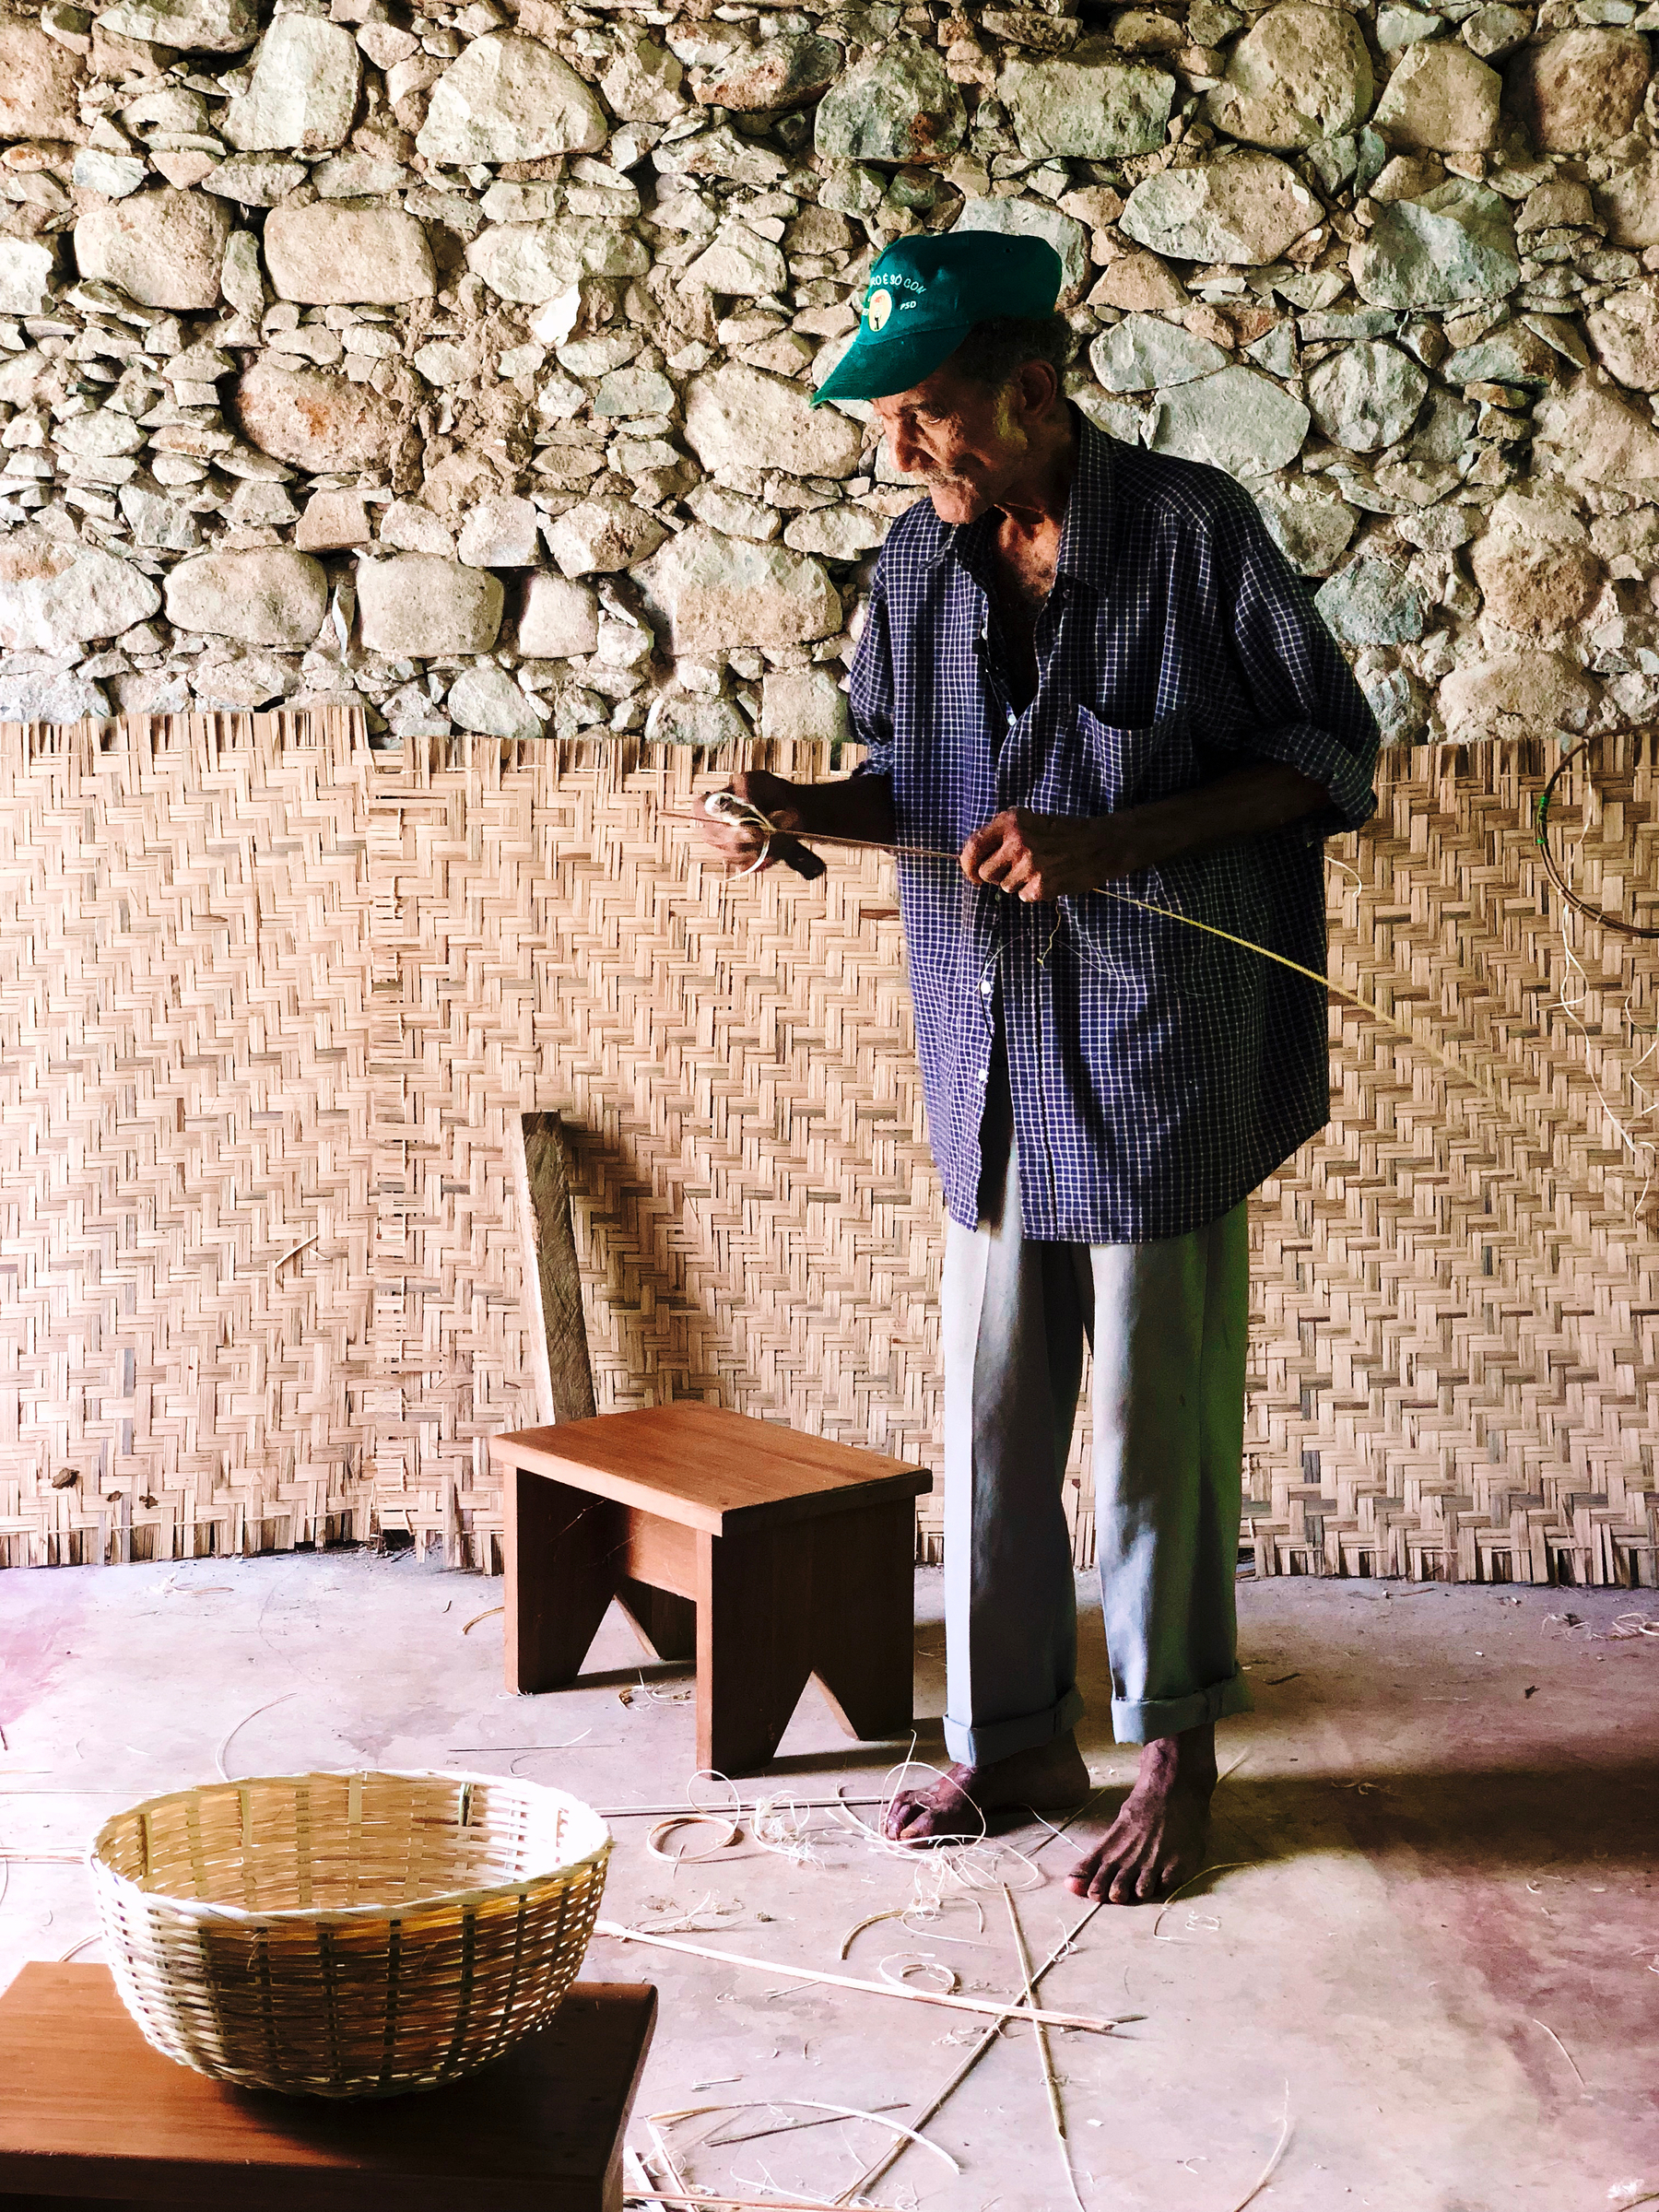 A gentleman prepares to weave. He’s standing next to a tiny stool, and a basket is seen in the foreground. 